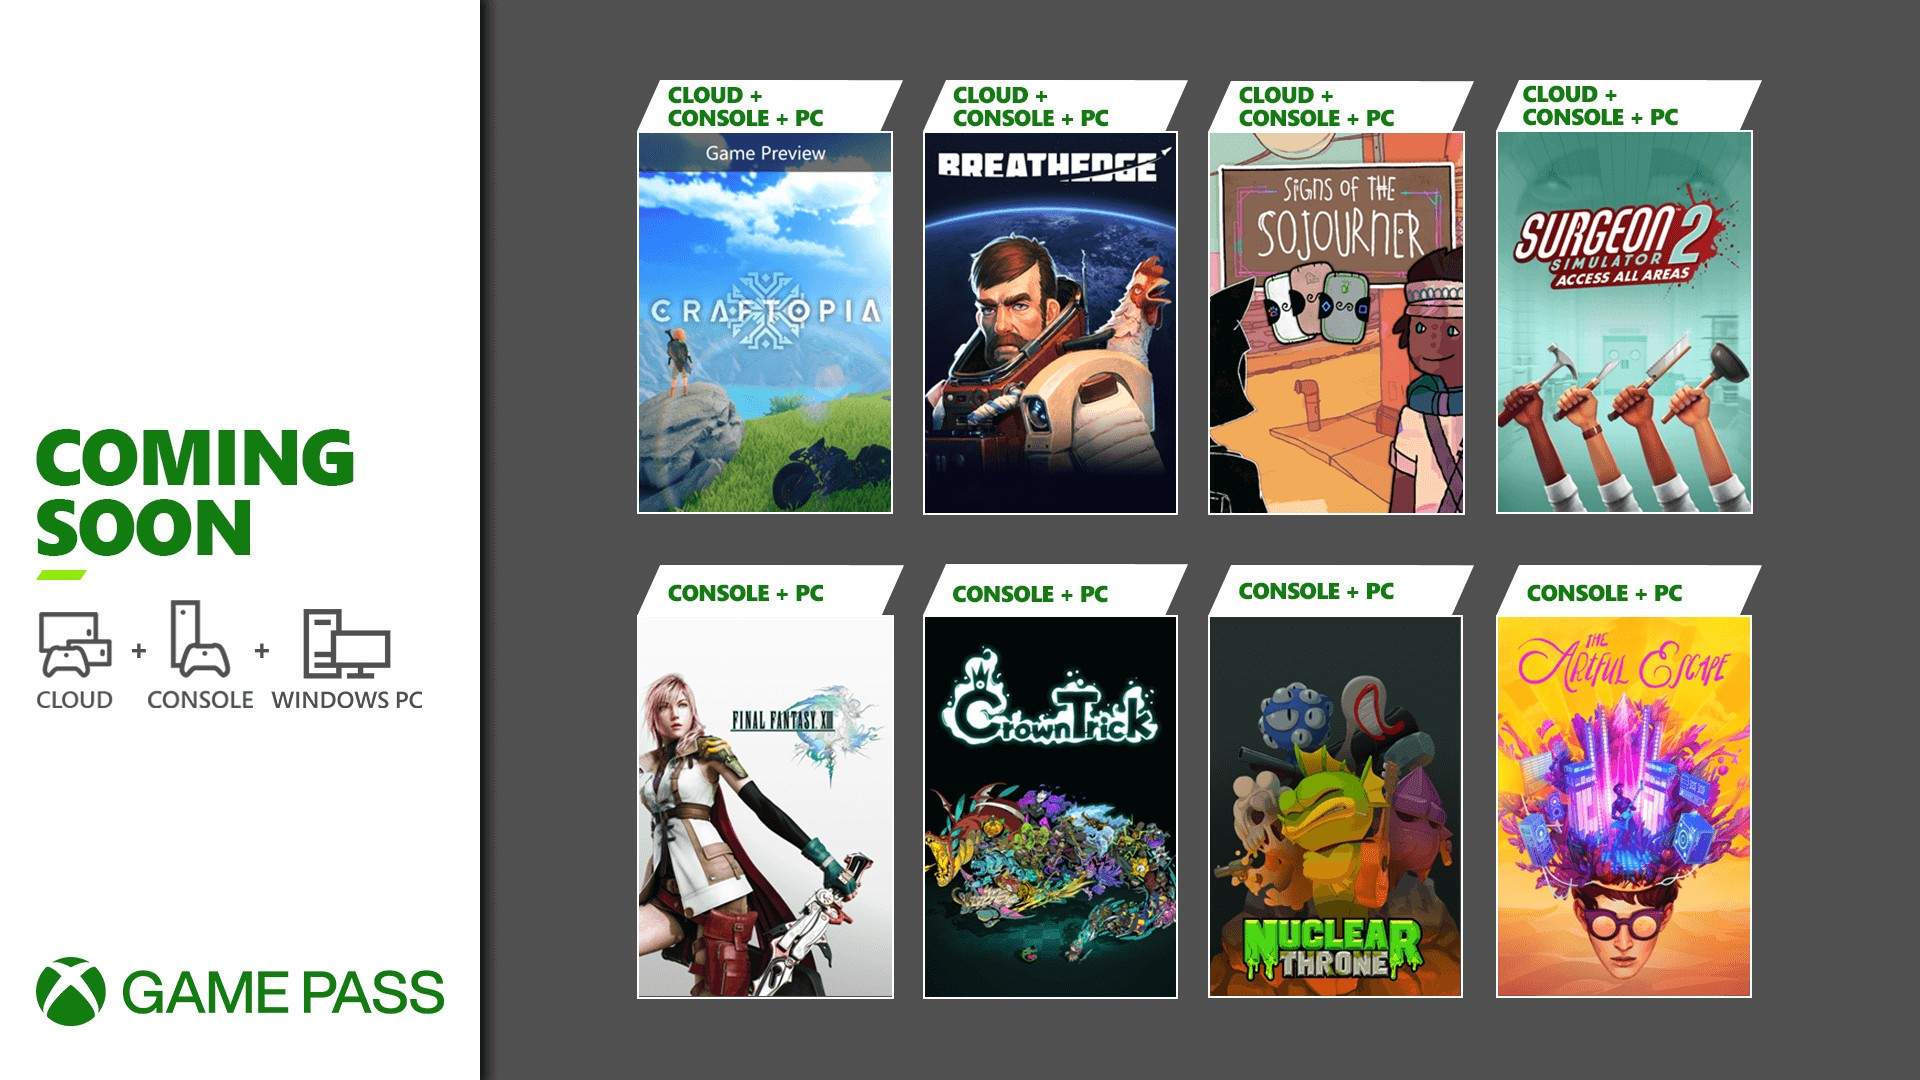 Xbox Game Pass adds Craftopia, Final Fantasy XIII, Surgeon Simulator 2, and more in early